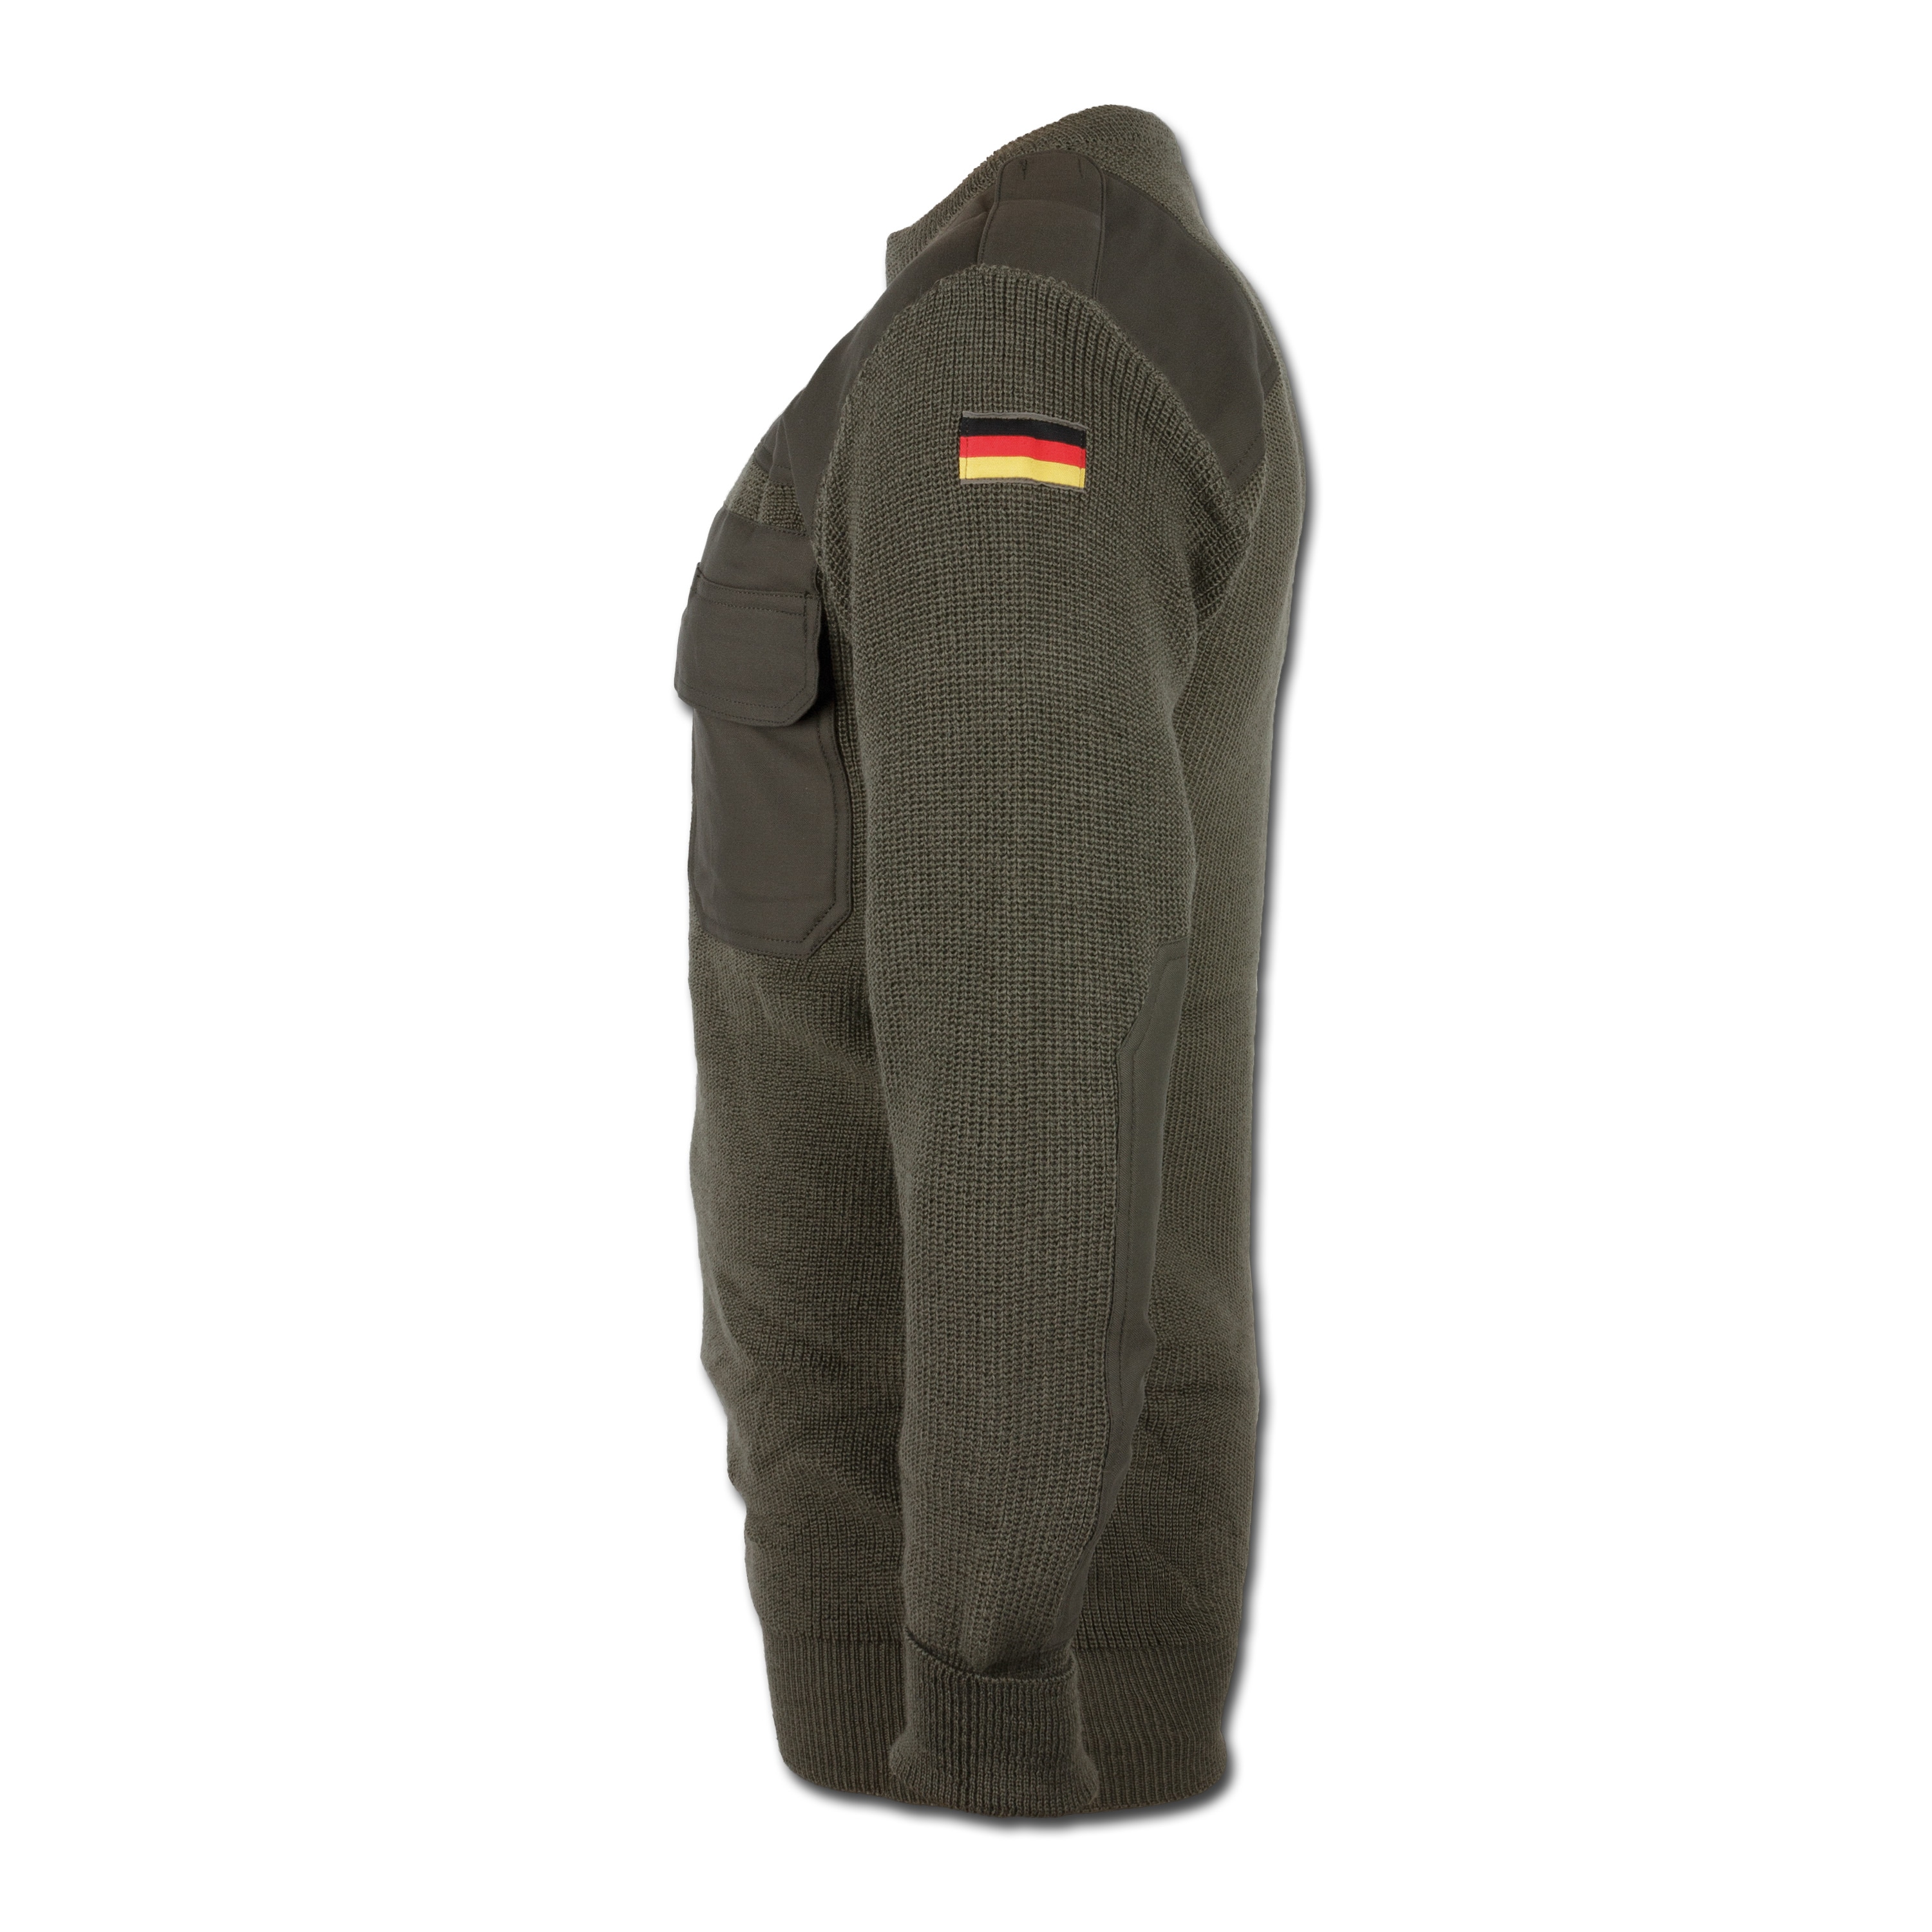 German Army Style Olive Green Jumper Pullover 